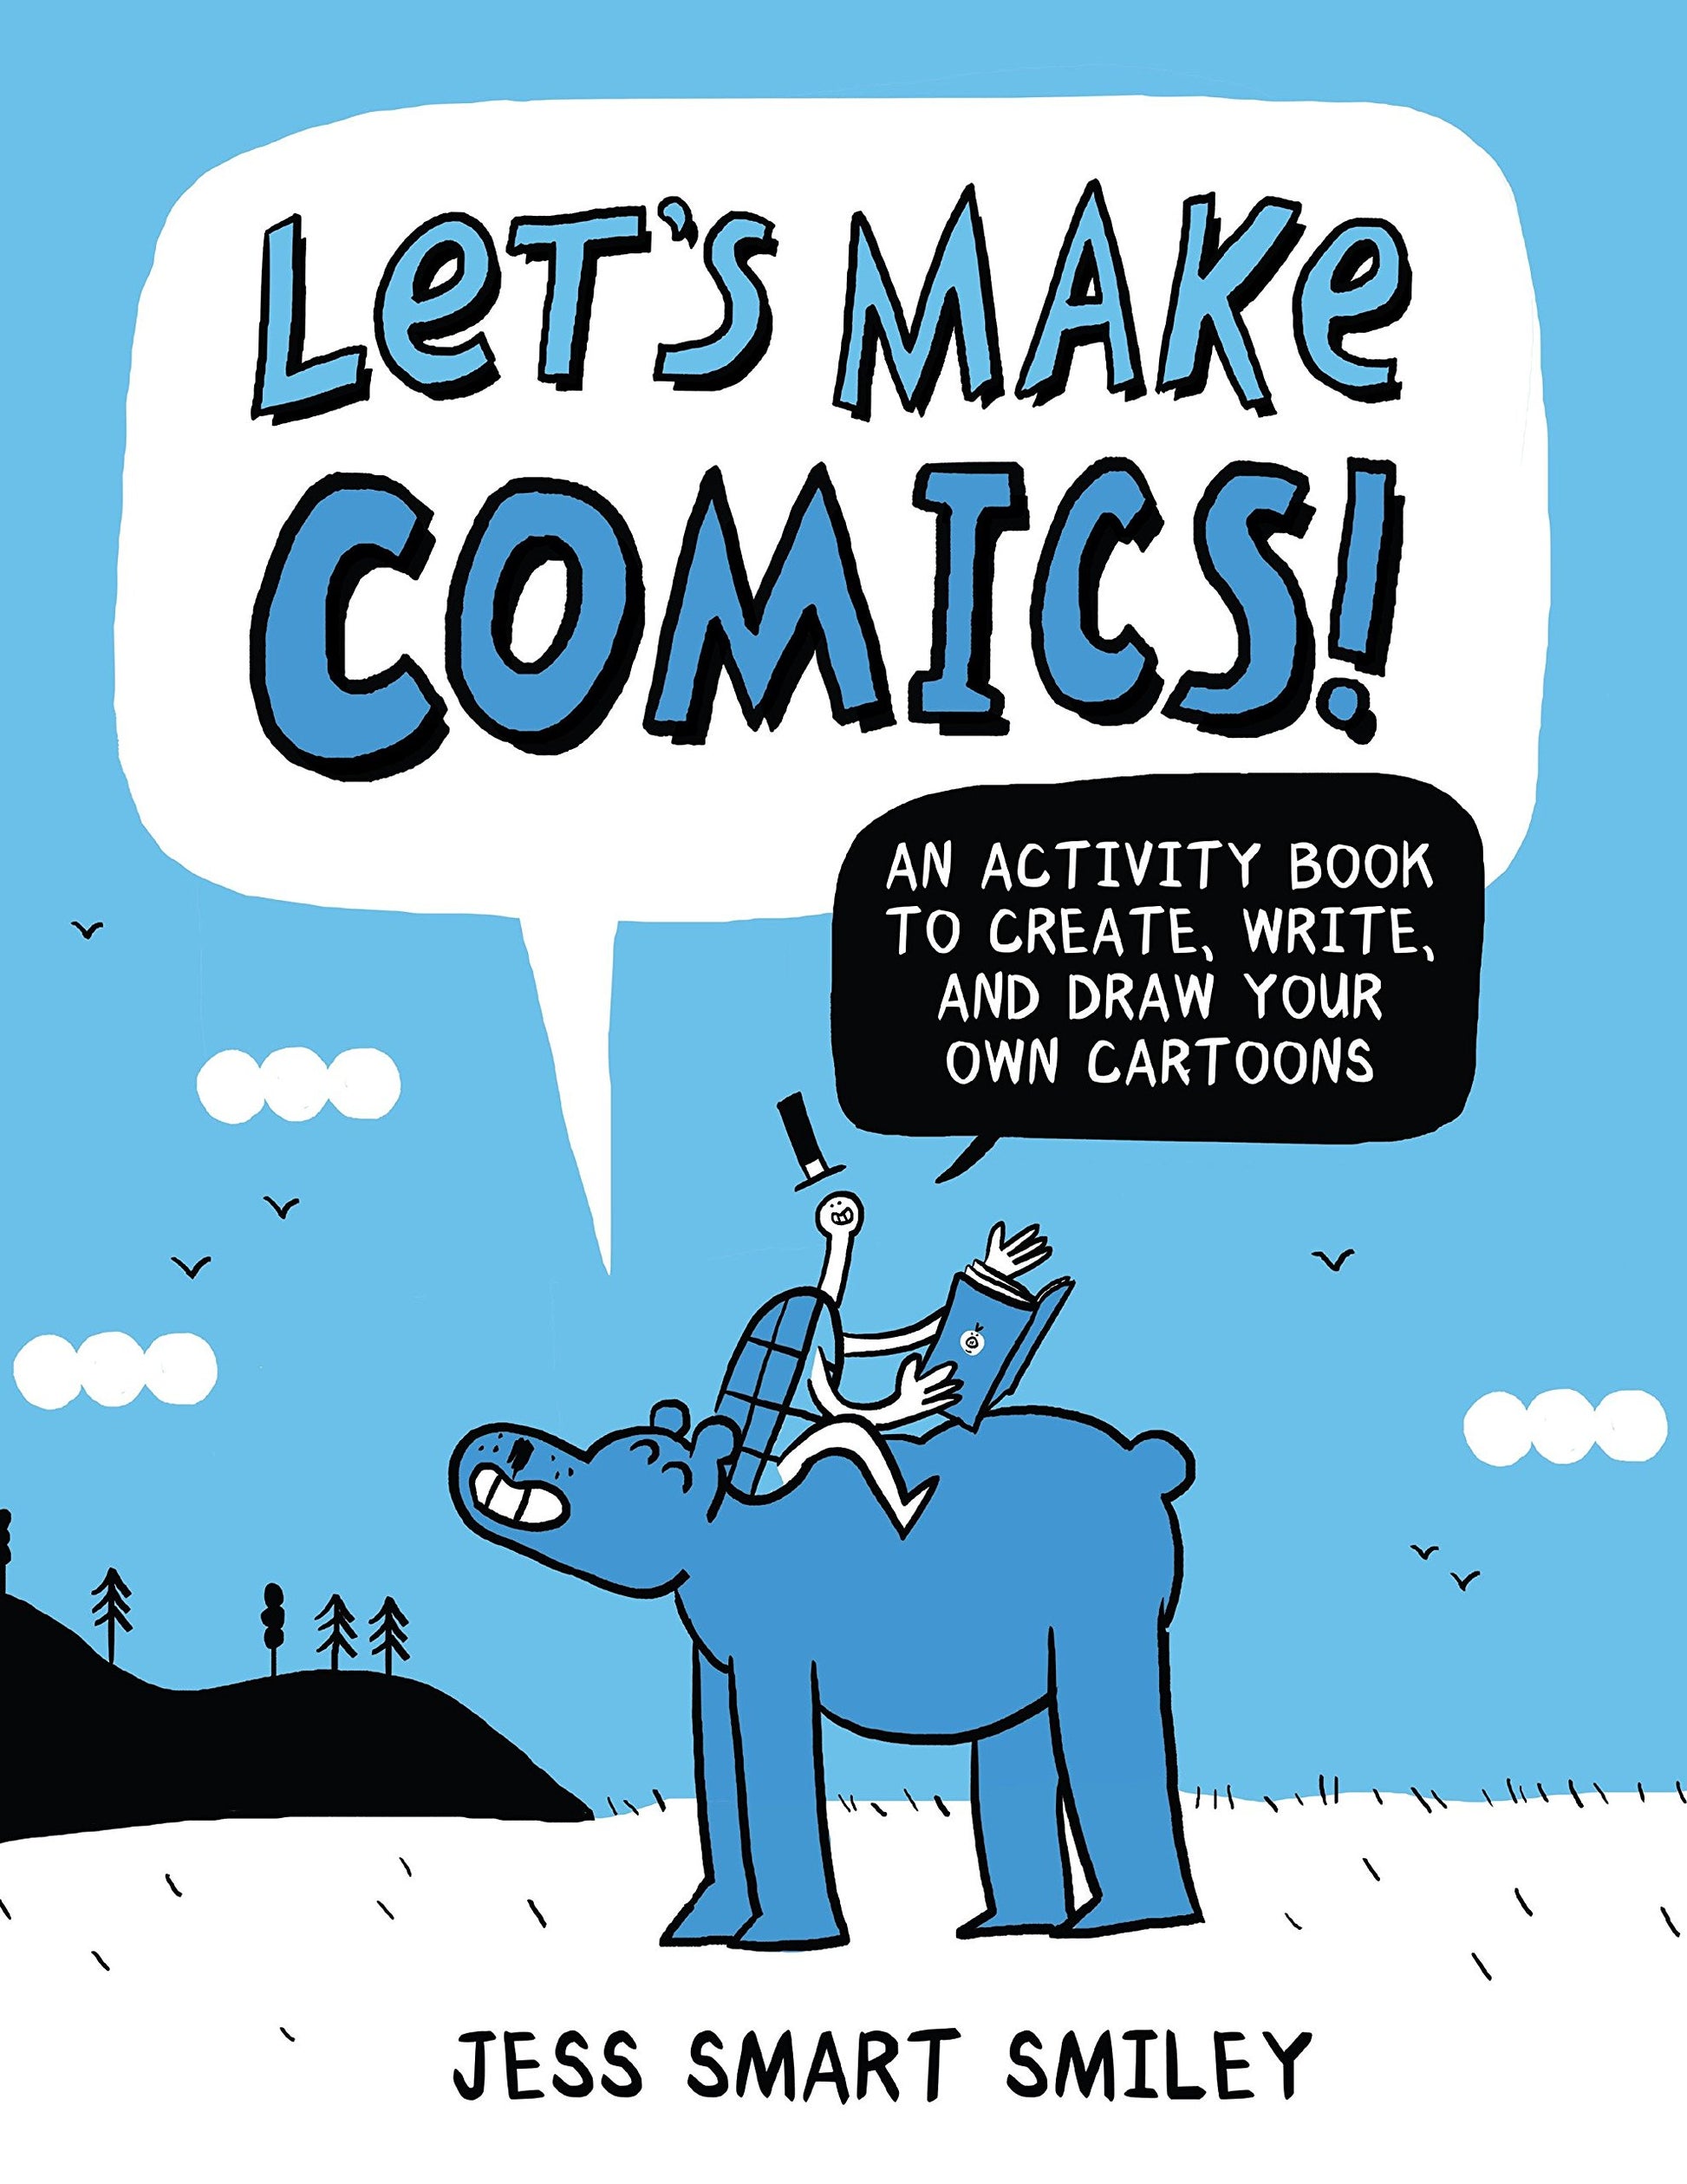 Let's Make Comics!: An Activity Book to Create, Write, and Draw Your Own Cartoons by Jess Smart Smiley